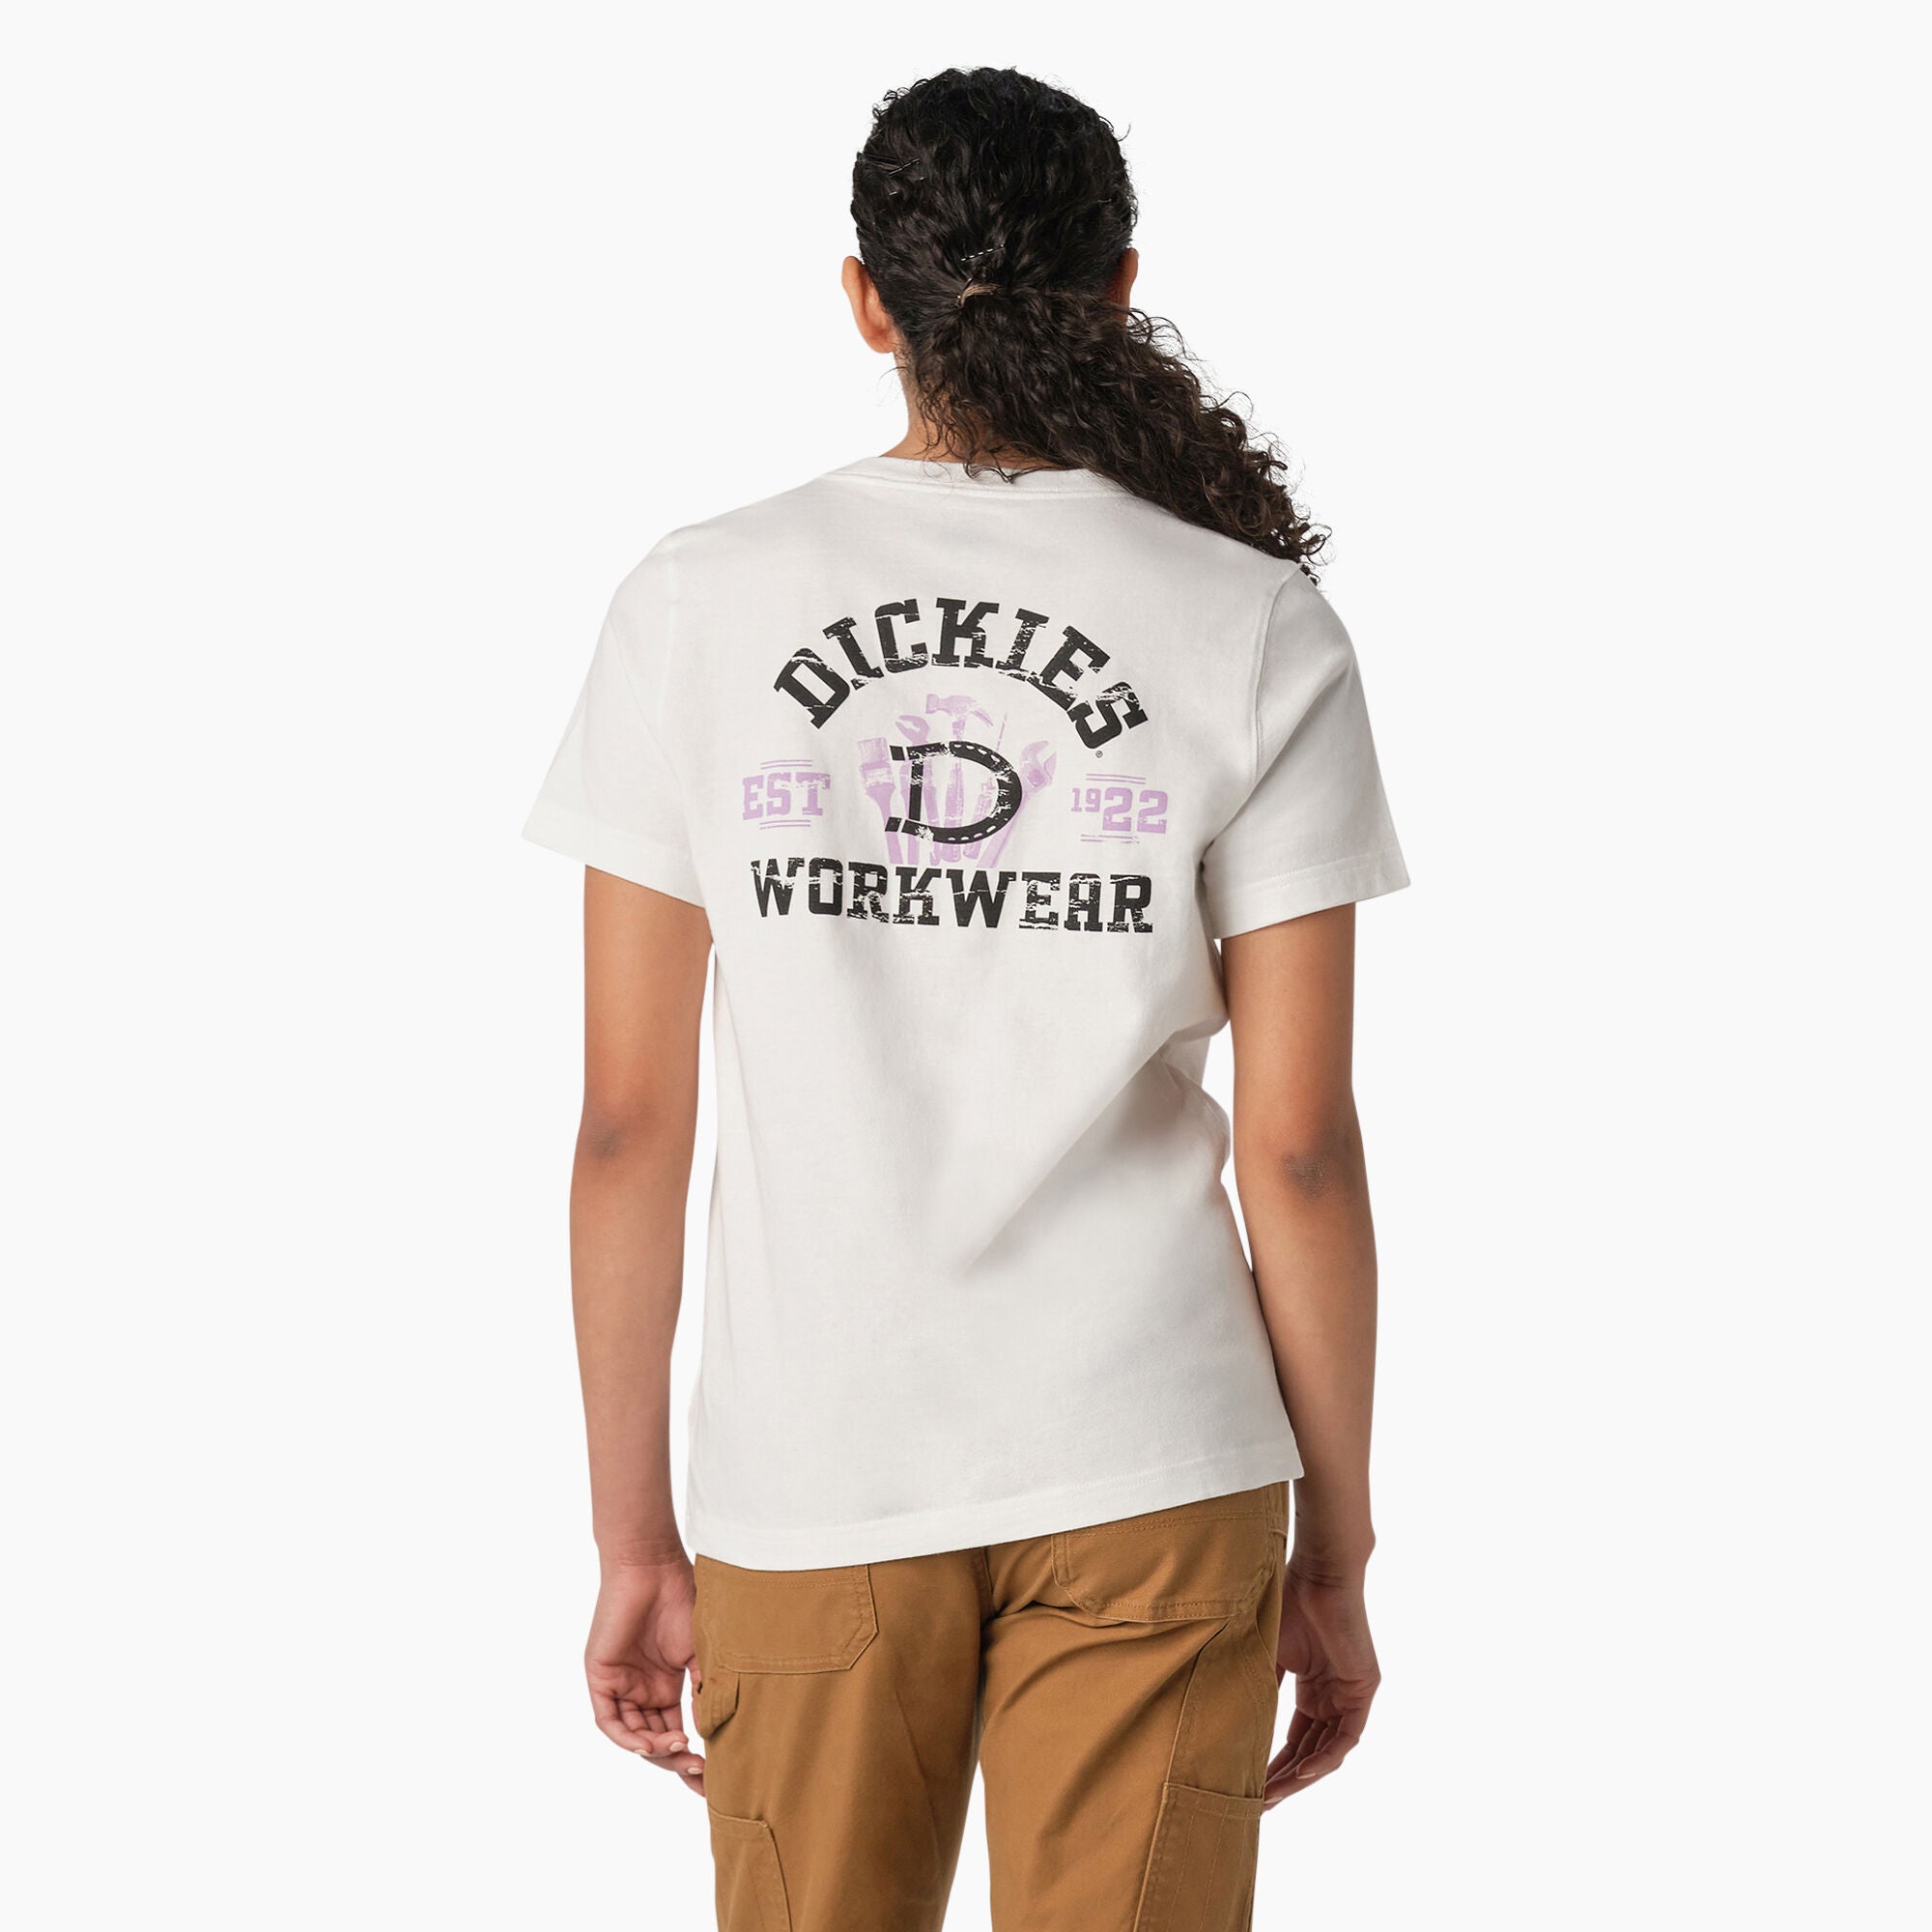 Dickies Women's "Dickies Workwear" Graphic Short Sleeve T-Shirt - Work World - Workwear, Work Boots, Safety Gear